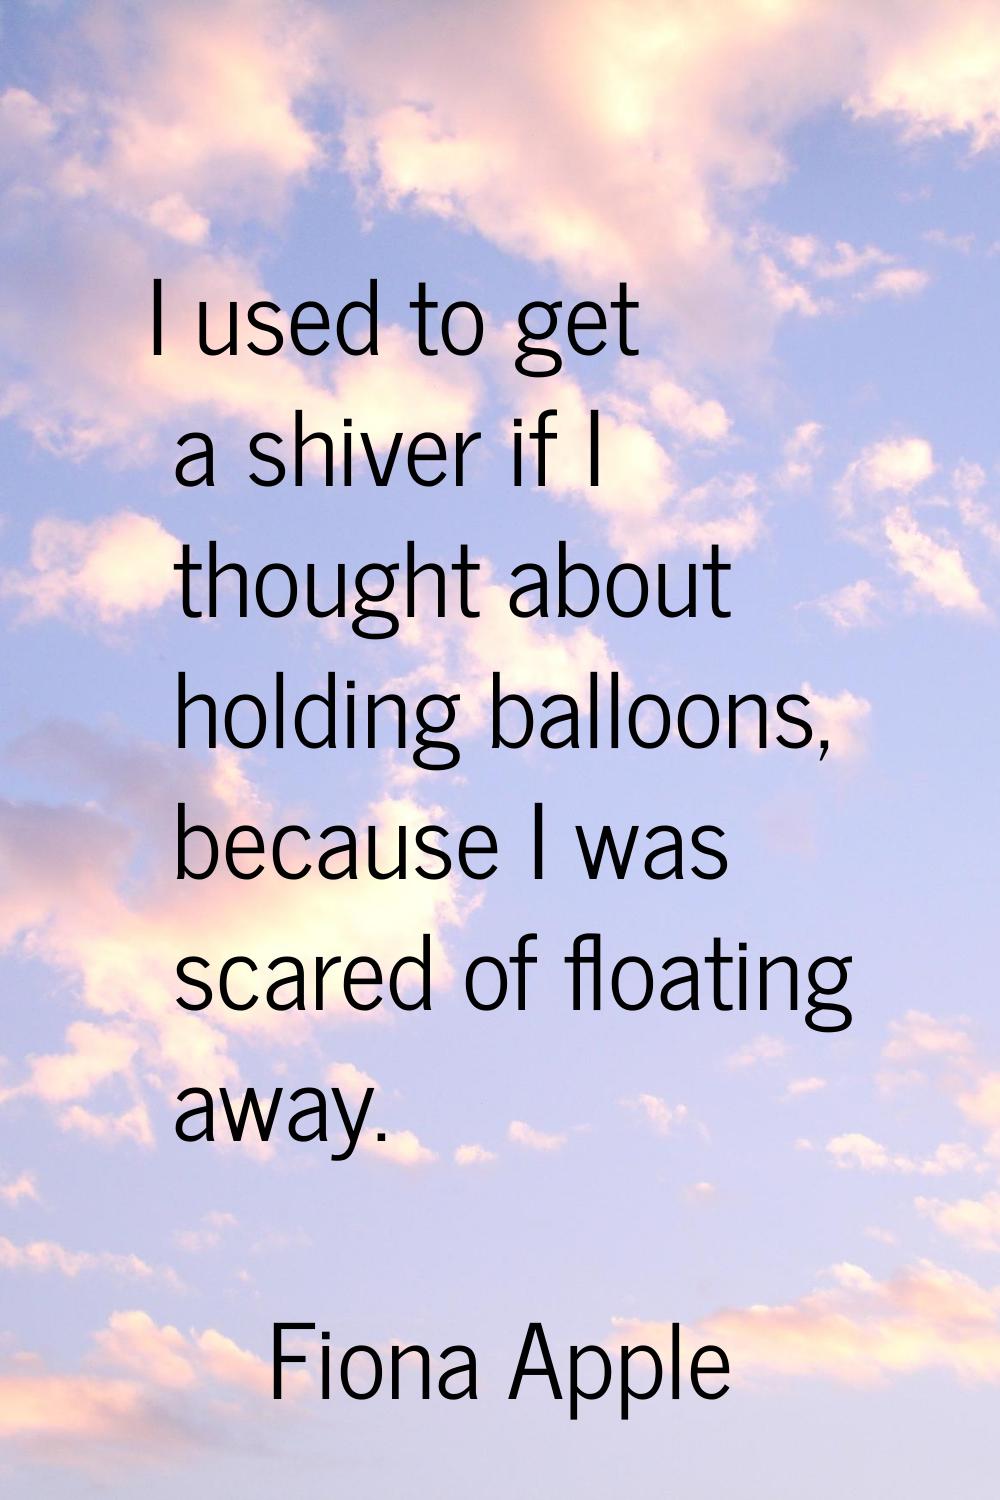 I used to get a shiver if I thought about holding balloons, because I was scared of floating away.